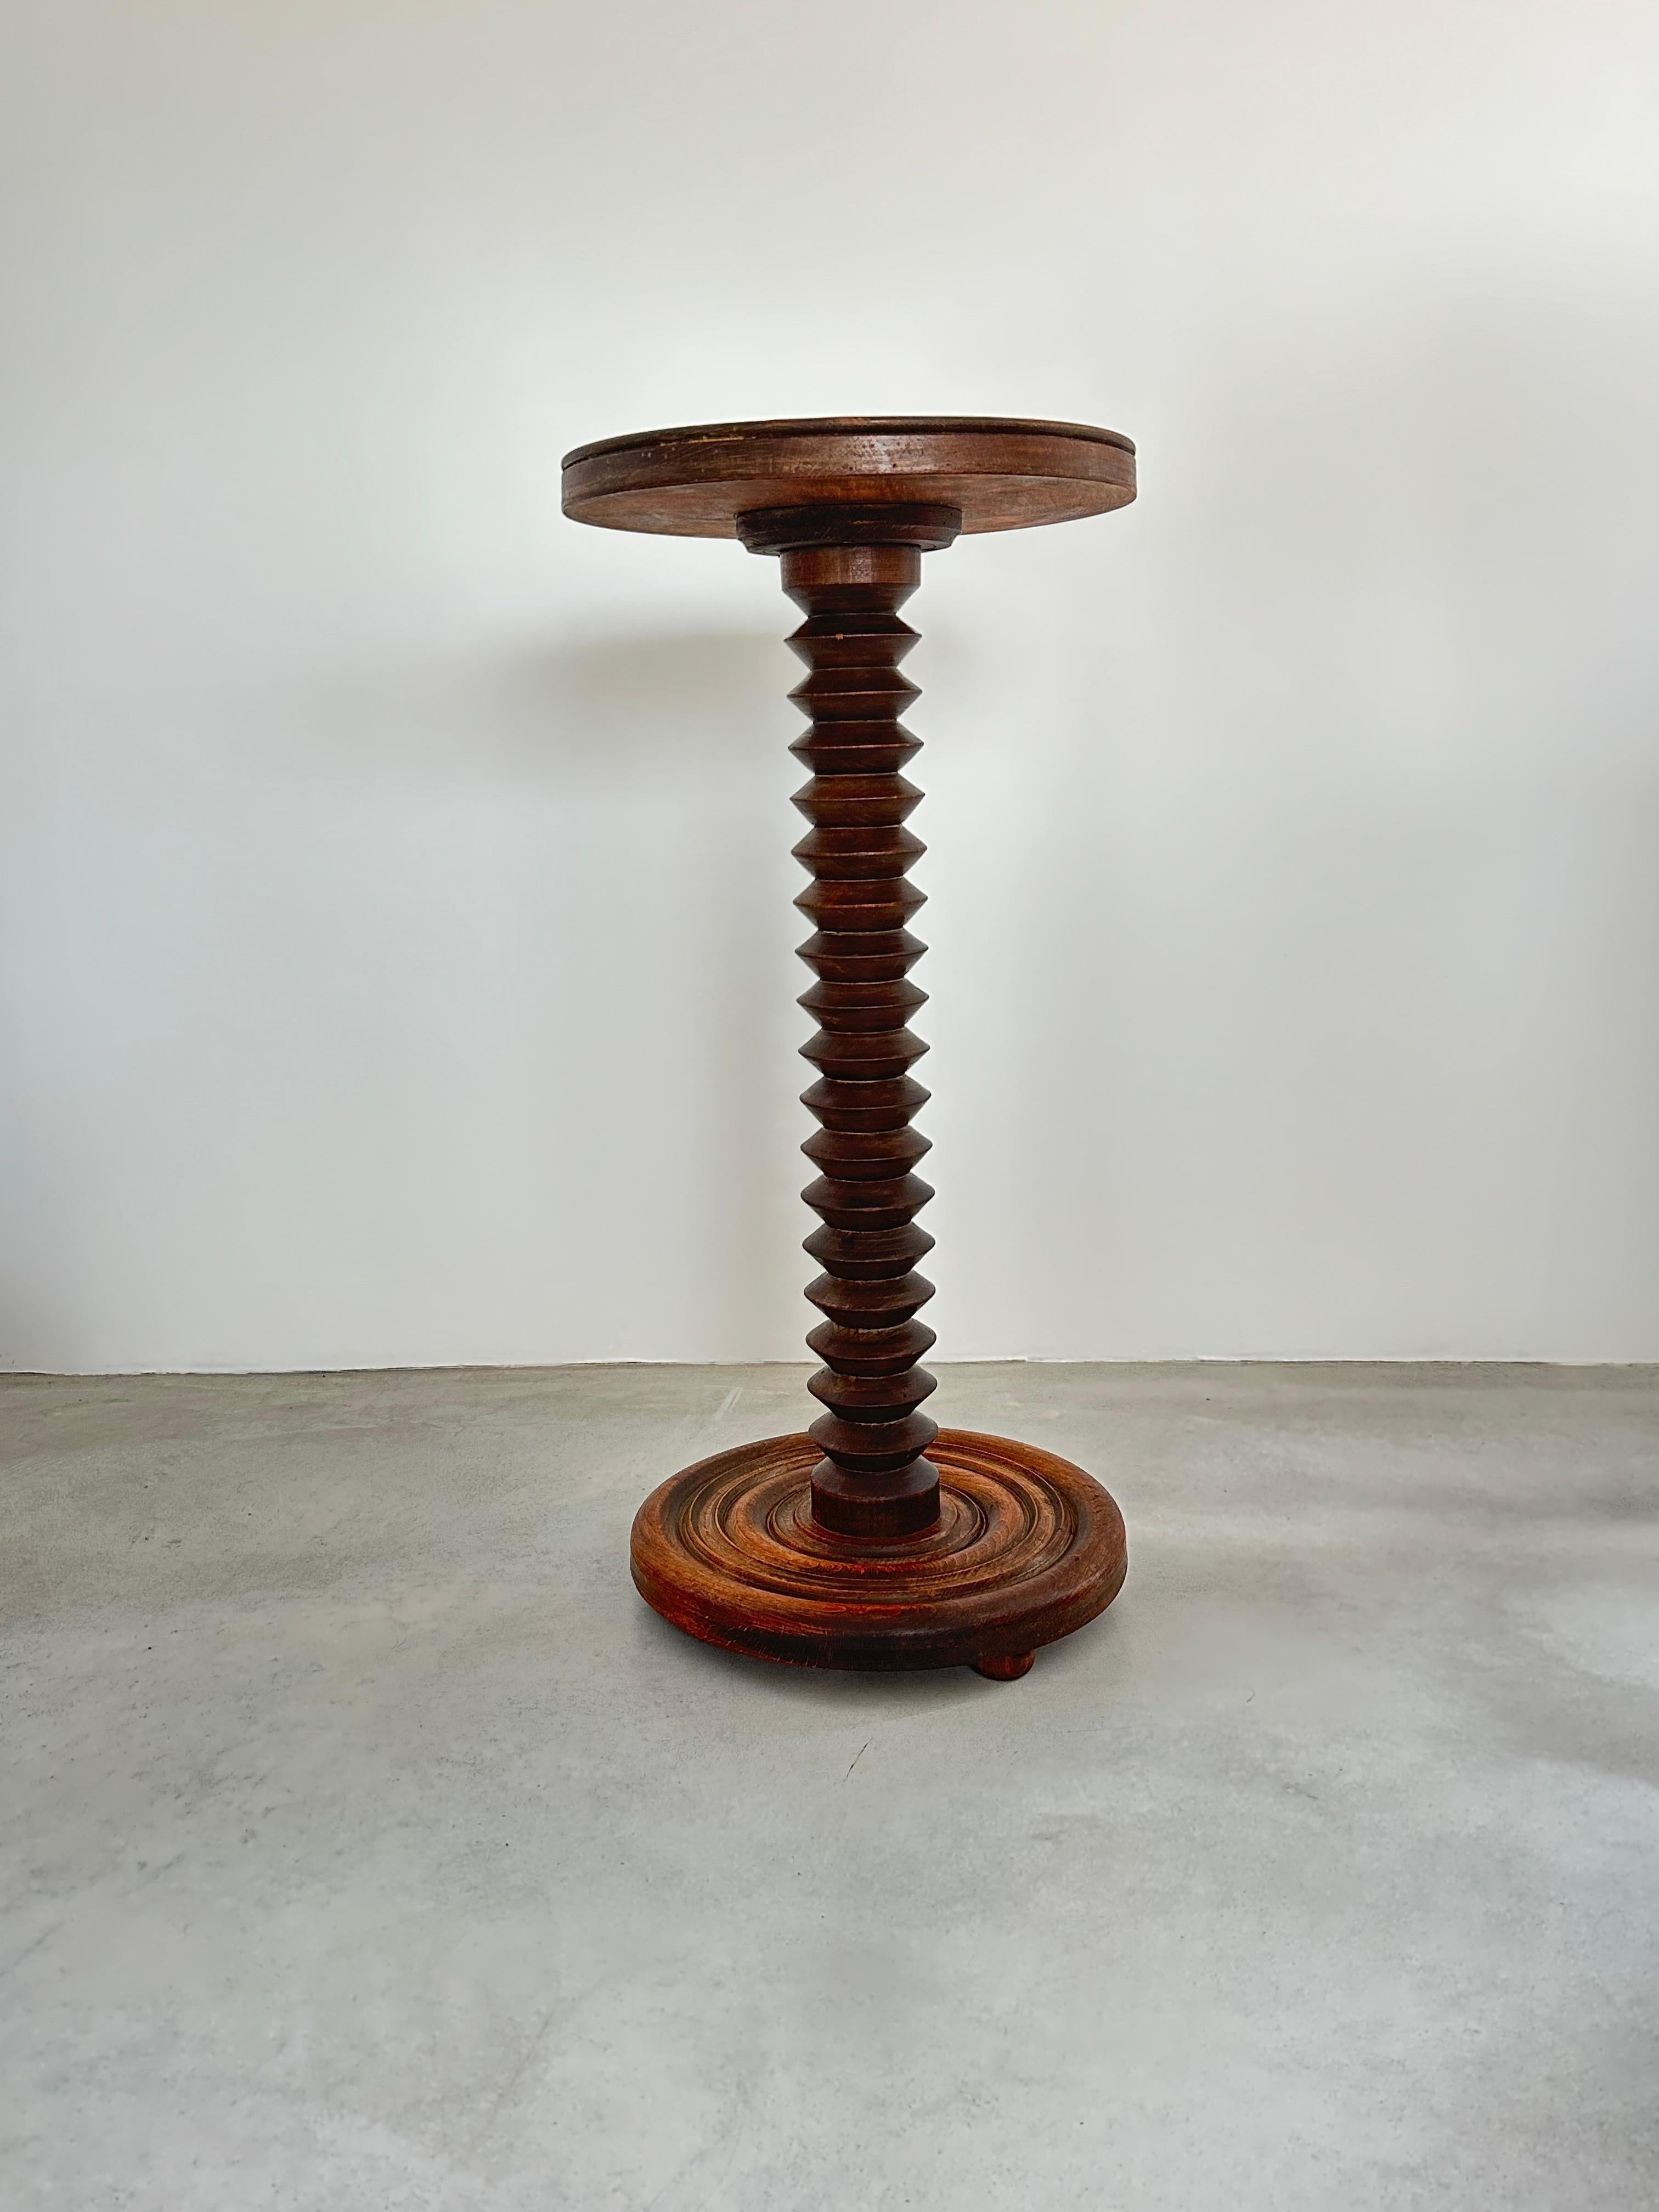 Elegant oak side table or pedestal created by Charles Dudouyt.

Beautiful rustic chic French design.

Circular base and top, diameter 15.74 inch / 40 cm.
Turned wooden body.
Table height 31.9 inch / 81 cm

The wood has been treated and waxed by a